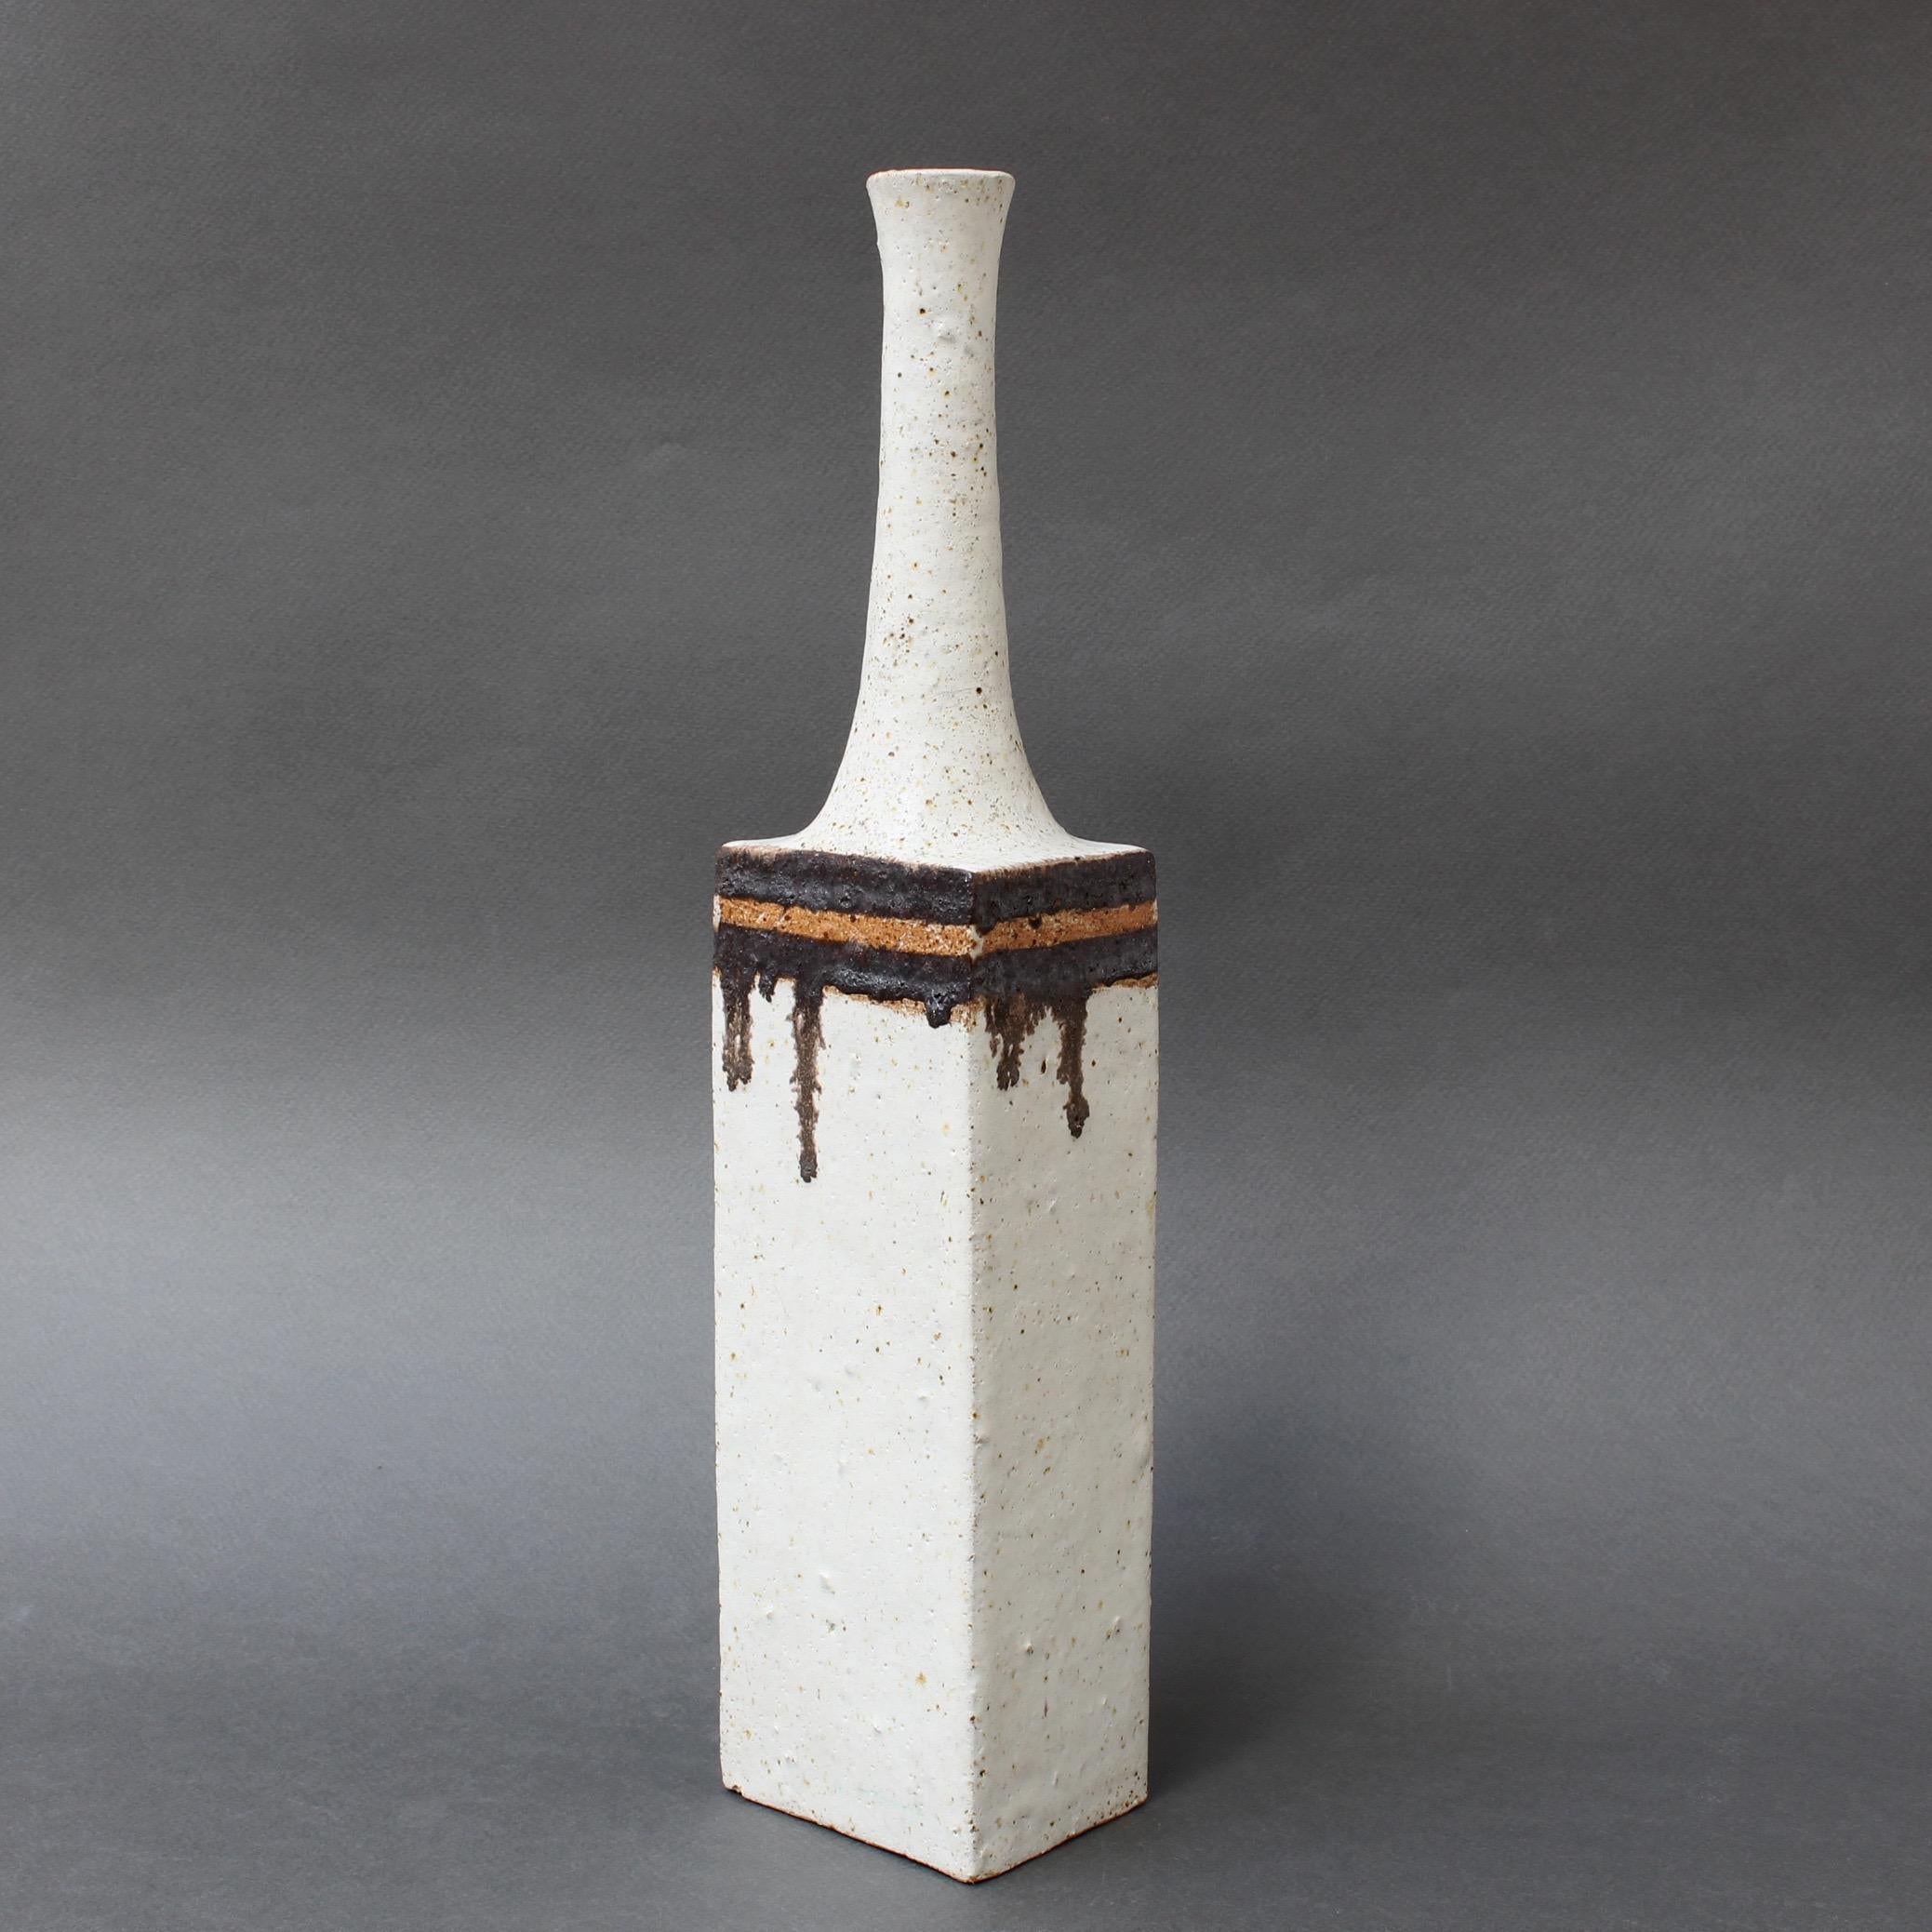 Ceramic decorative vase with chalk-white surface and chocolate-brown drip motif on the top of the rectangular body, by ceramicist Bruno Gambone, (circa 1970s). This graceful narrow-opening decorative vase is a work of art. With a modern rectangular